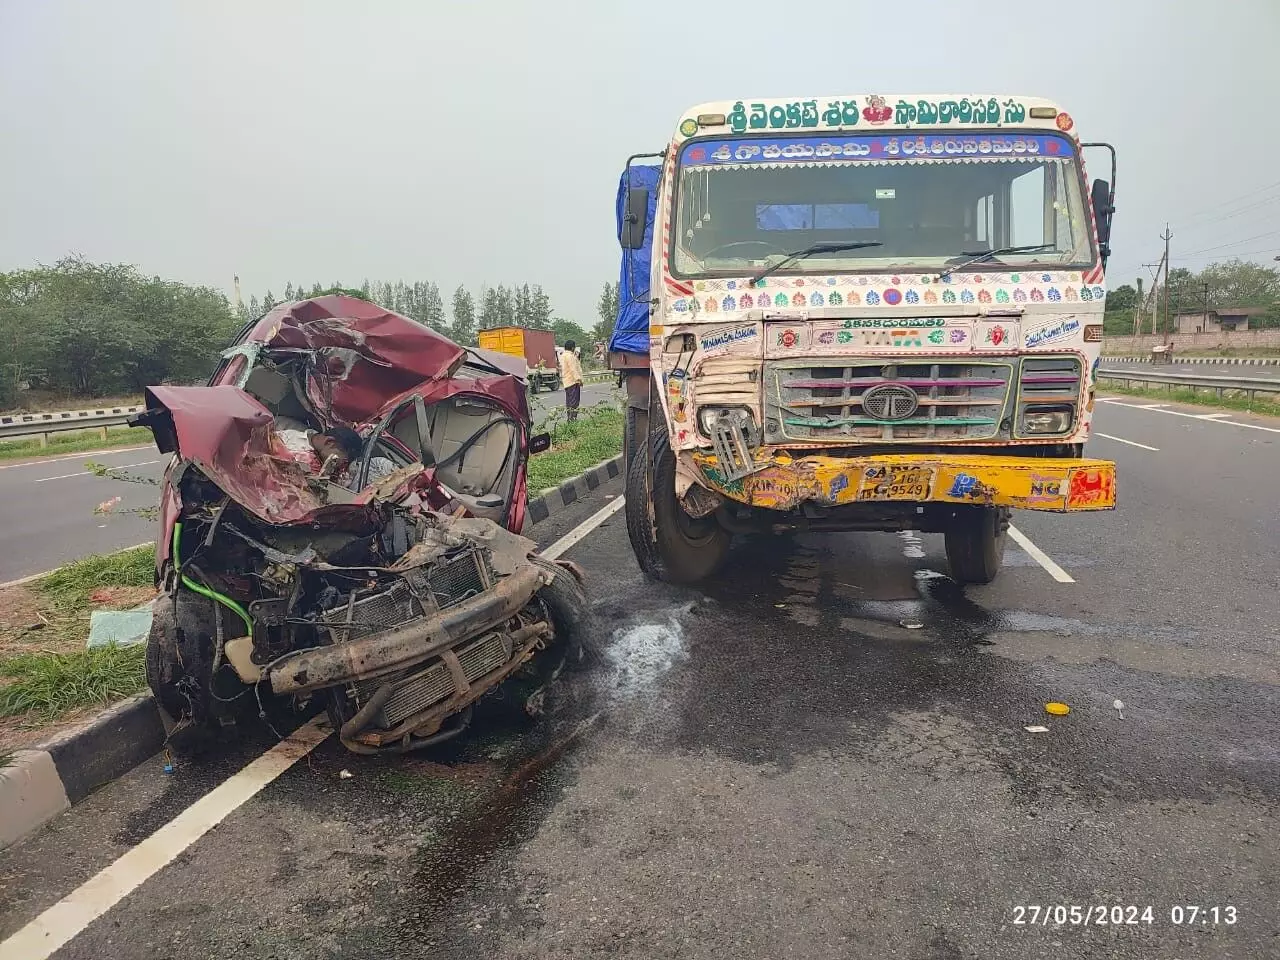 11 including Telangana district court judge killed in different road accidents in Andhra Pradesh